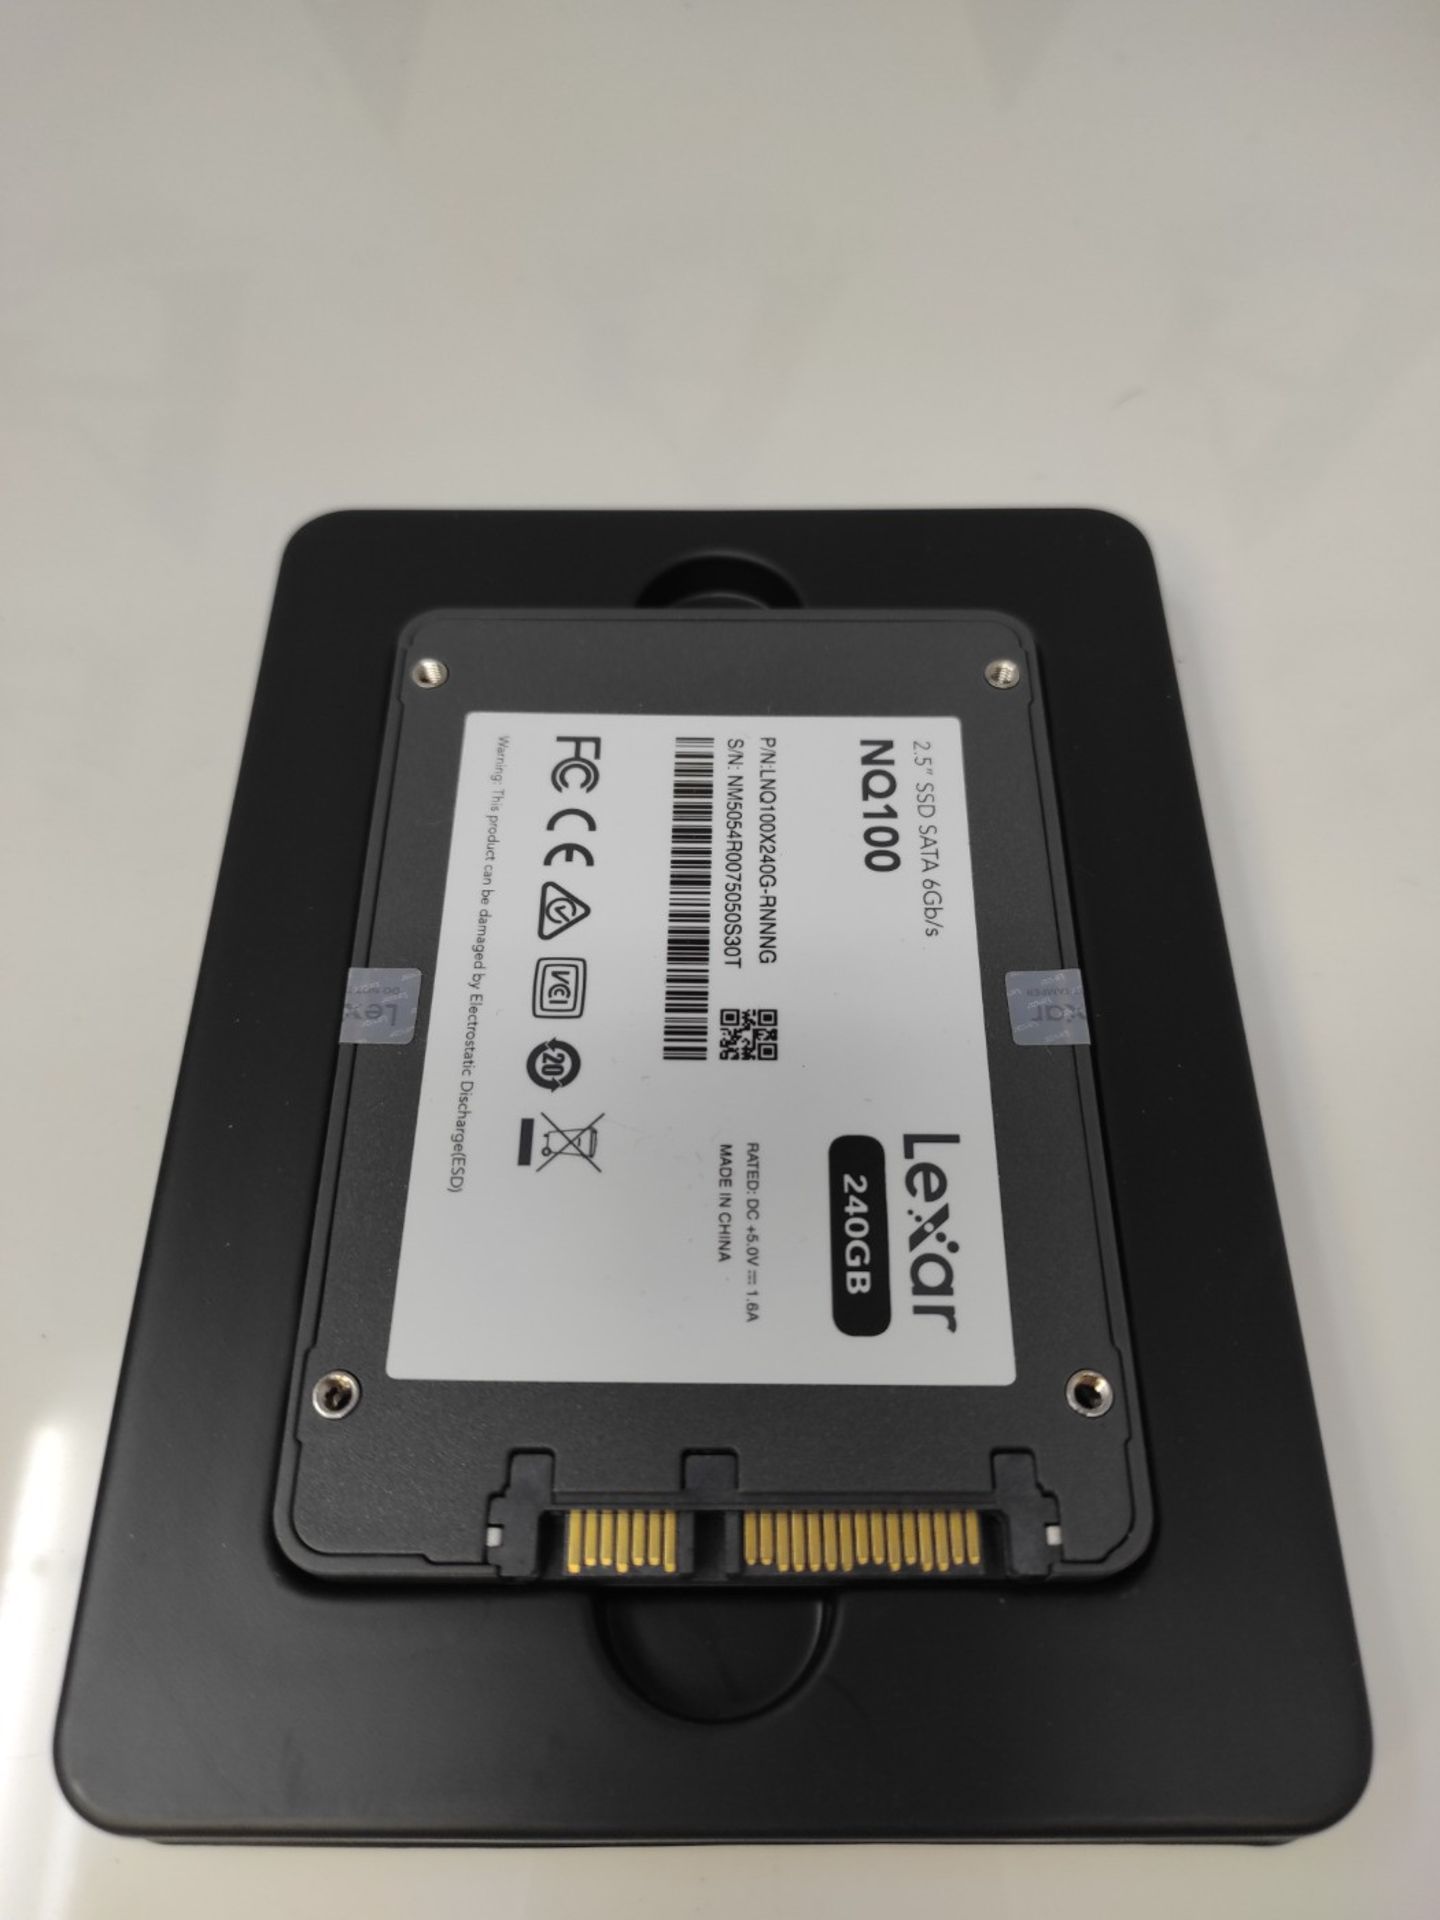 Lexar NQ100 2.5" SATA III (6 Gb/s) 240 GB SSD, Up to 550 MB/s Read Solid State Drive, - Image 3 of 6